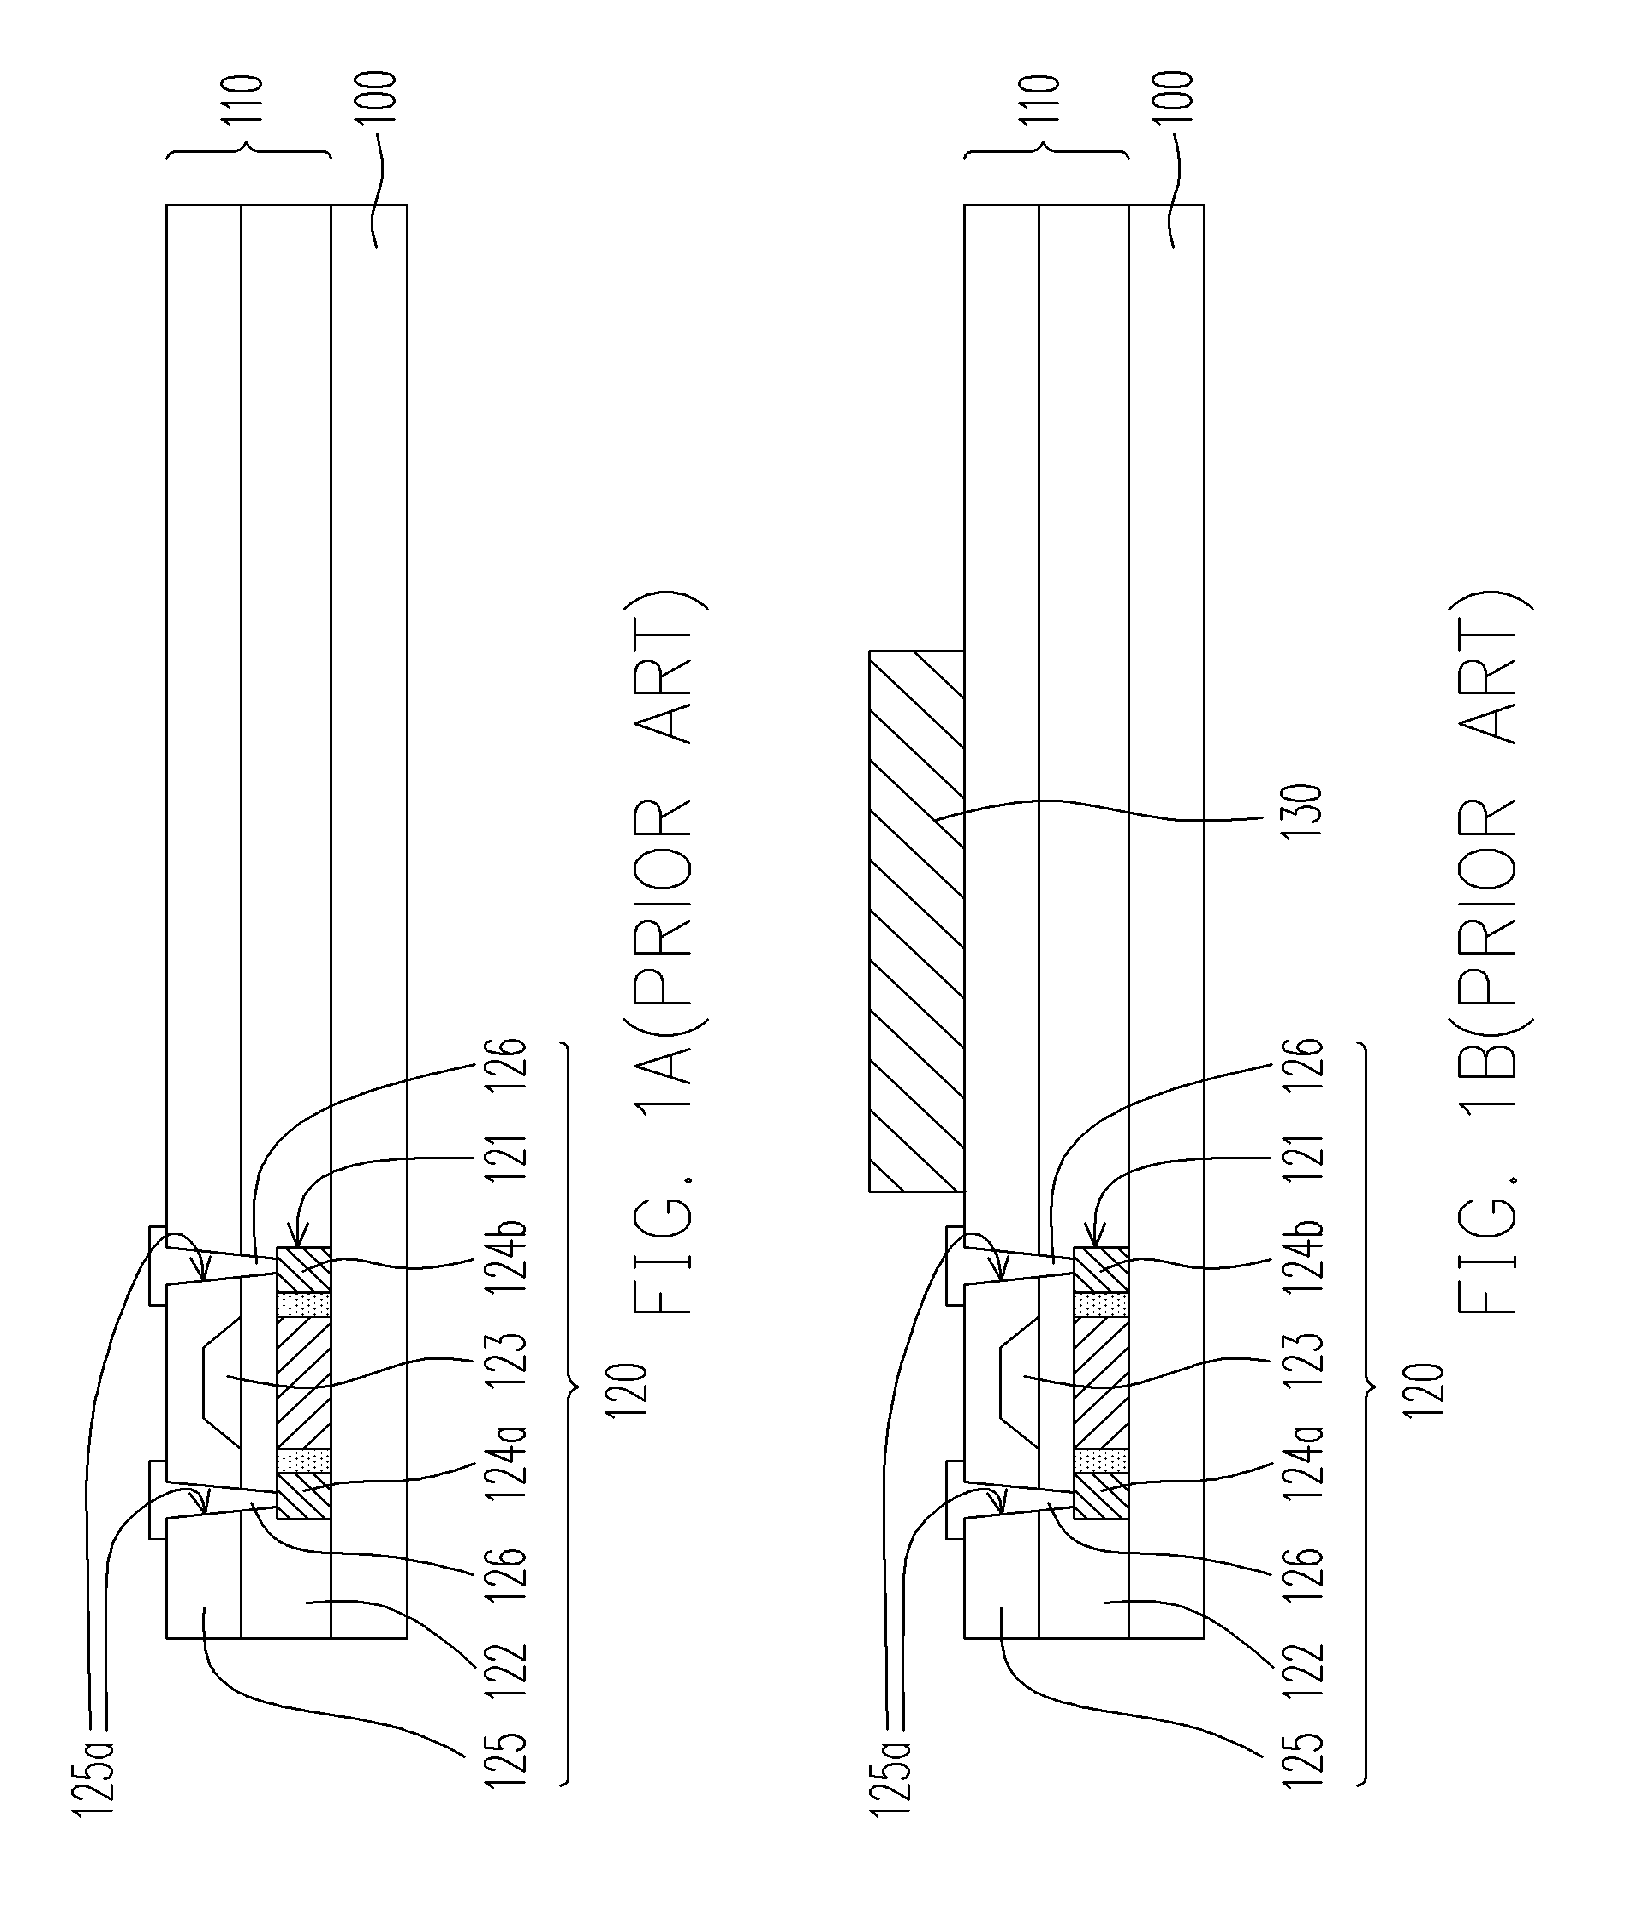 Method for fabricating active matrix organic light emitting diode display device and structure of such device